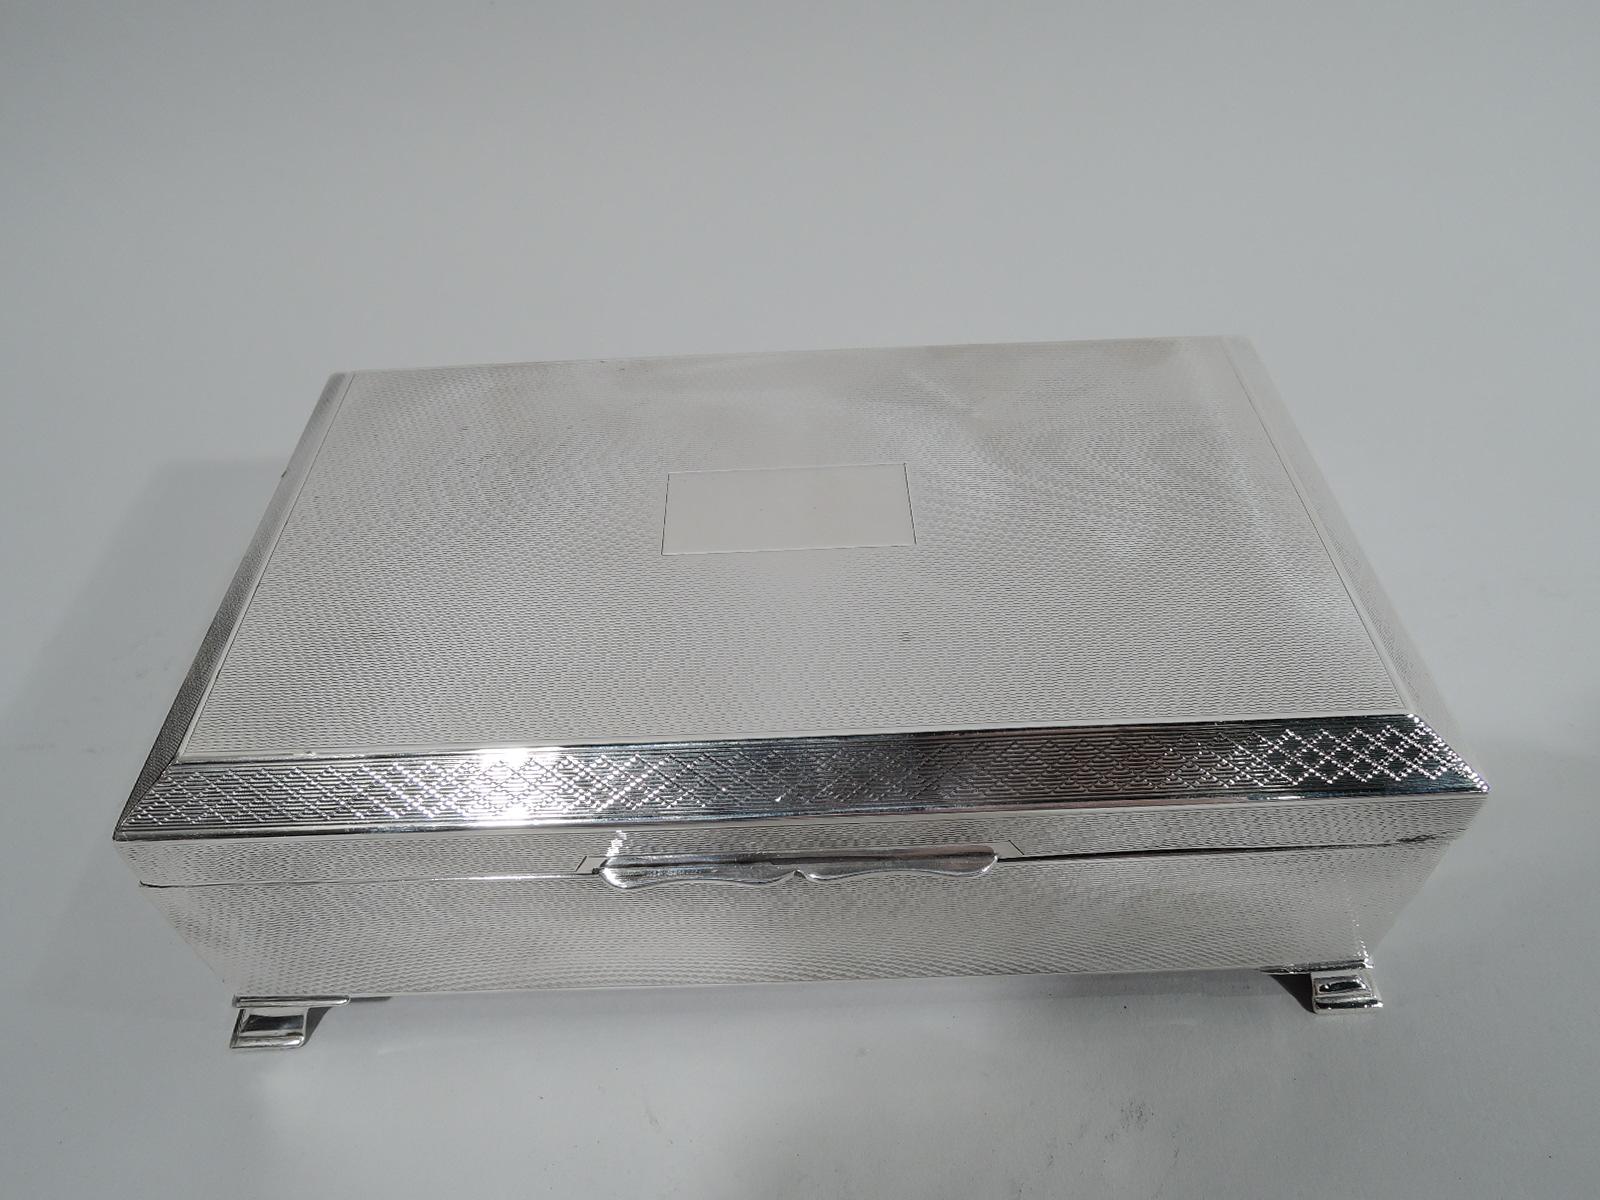 English Art Deco sterling silver box, 1946. Rectangular with straight sides. Cover flat, hinged, and tabbed with central rectangle (vacant). All-over engine-turned wave ornament on sides and cover. Cover rim faceted with geometric border. Plain